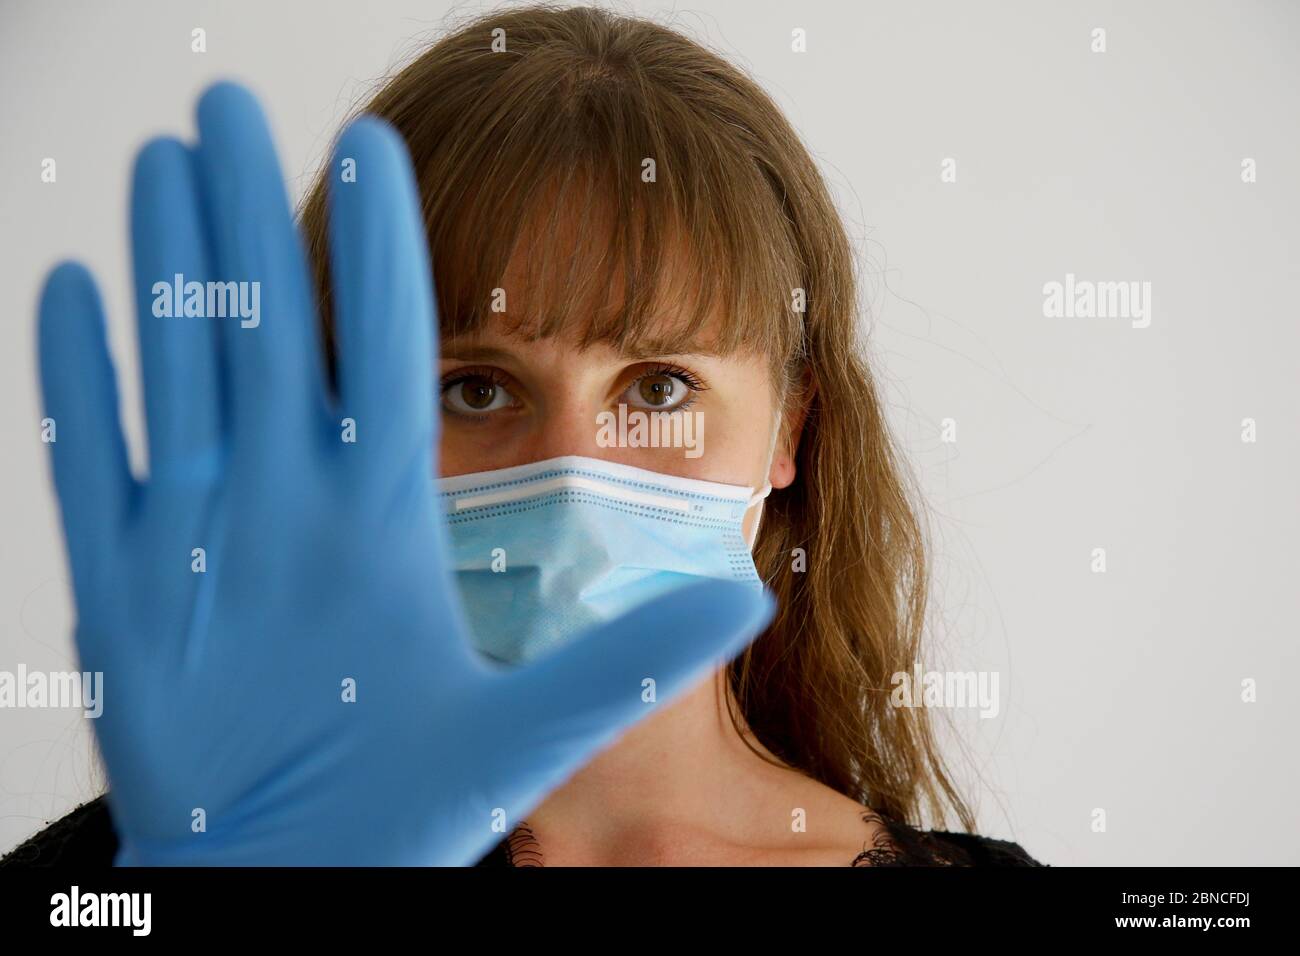 Covid-10 prevention and social distancing.  Young woman wearing mask and latex gloves taking preventative measures. Stock Photo